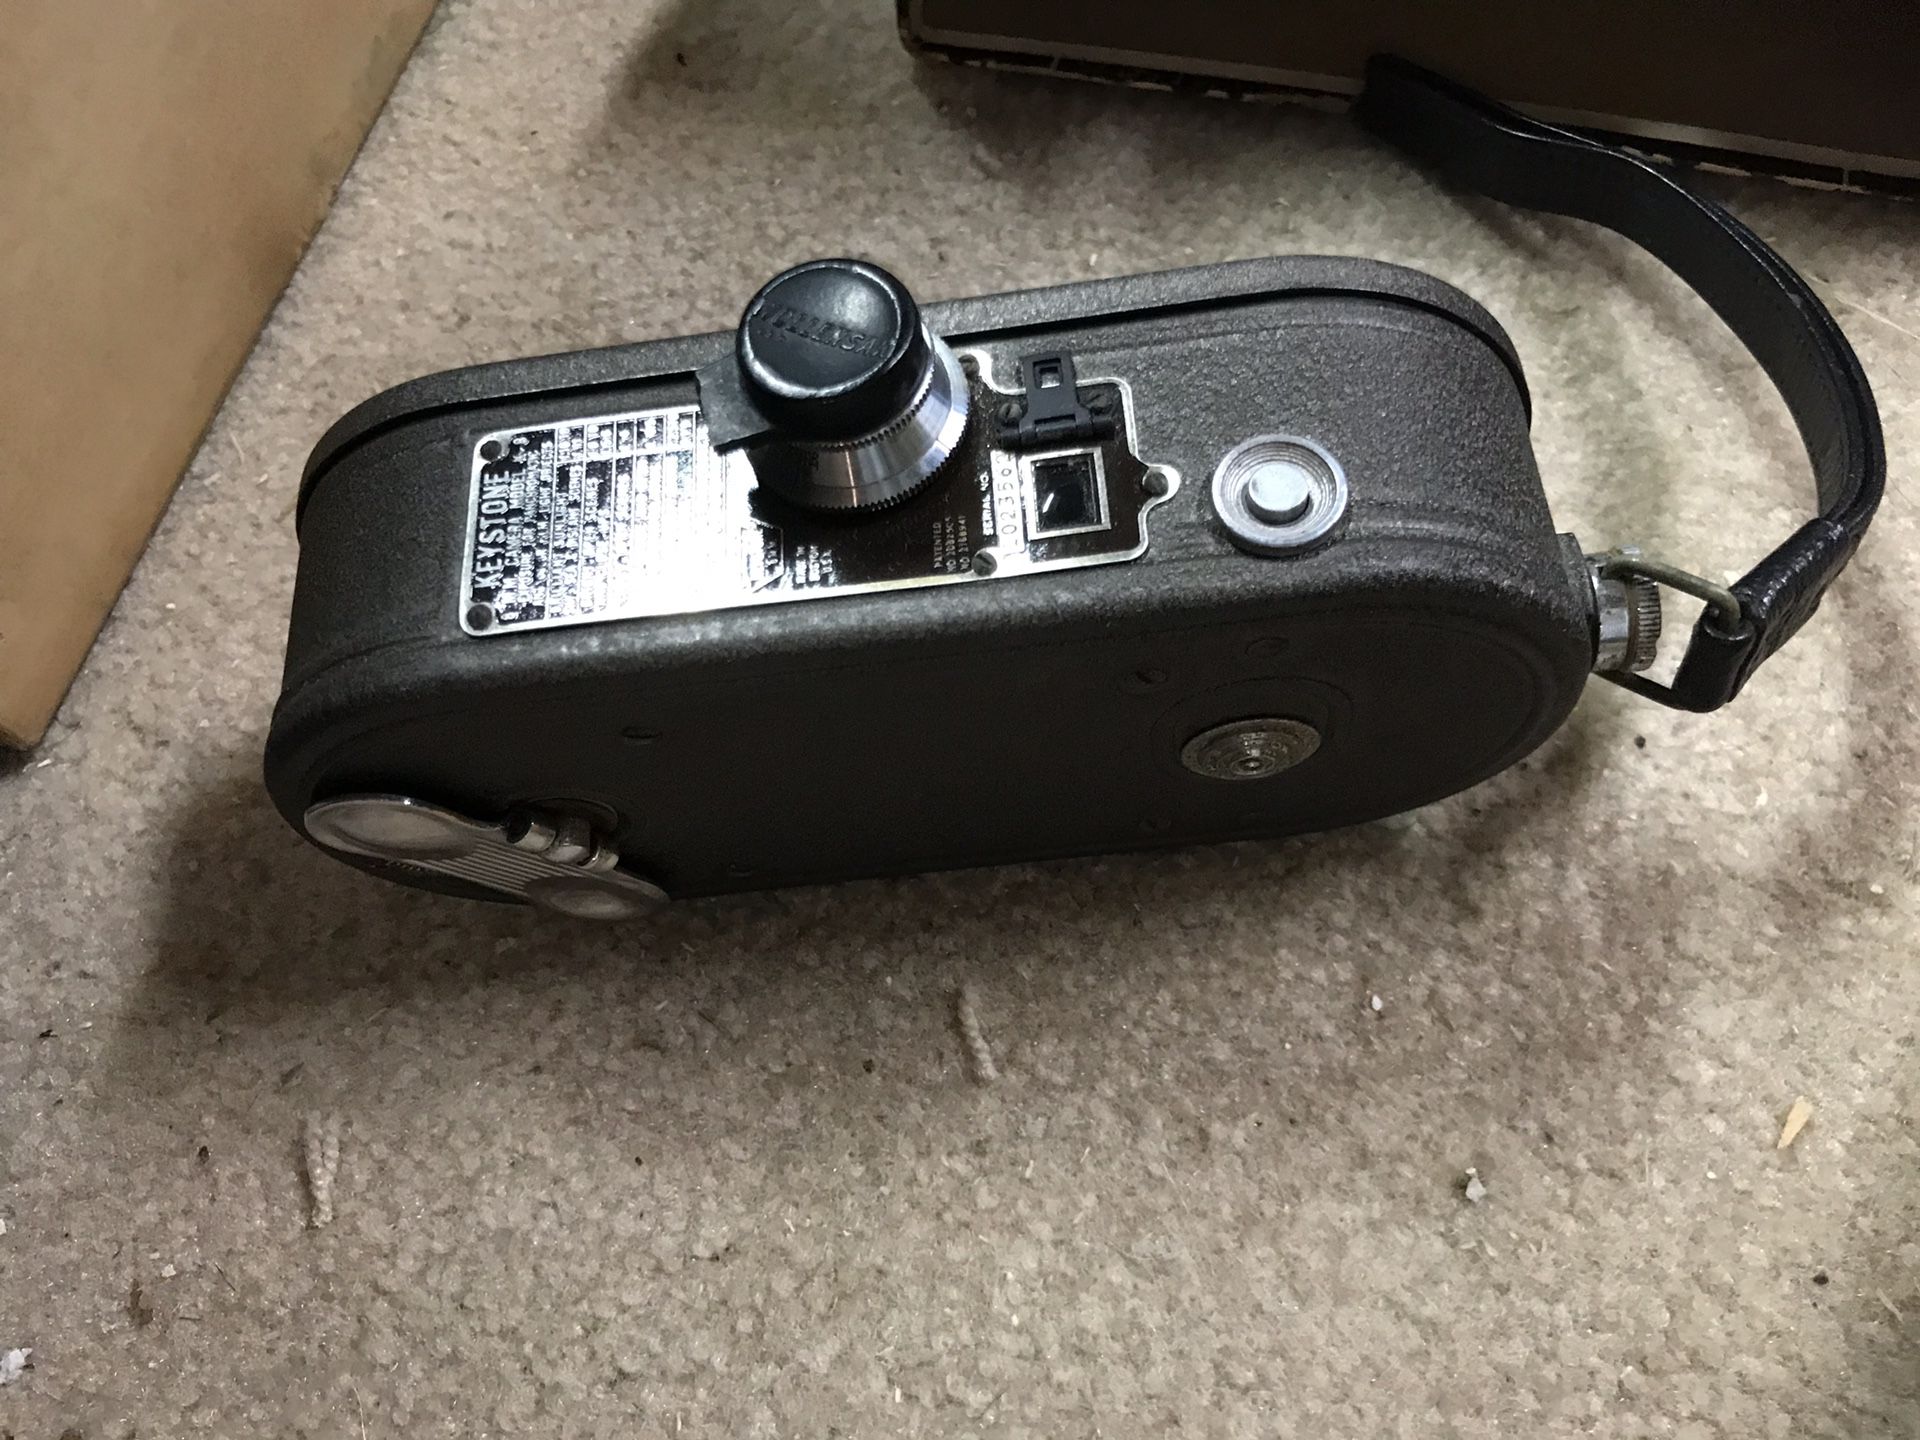 Old cameras for collectors